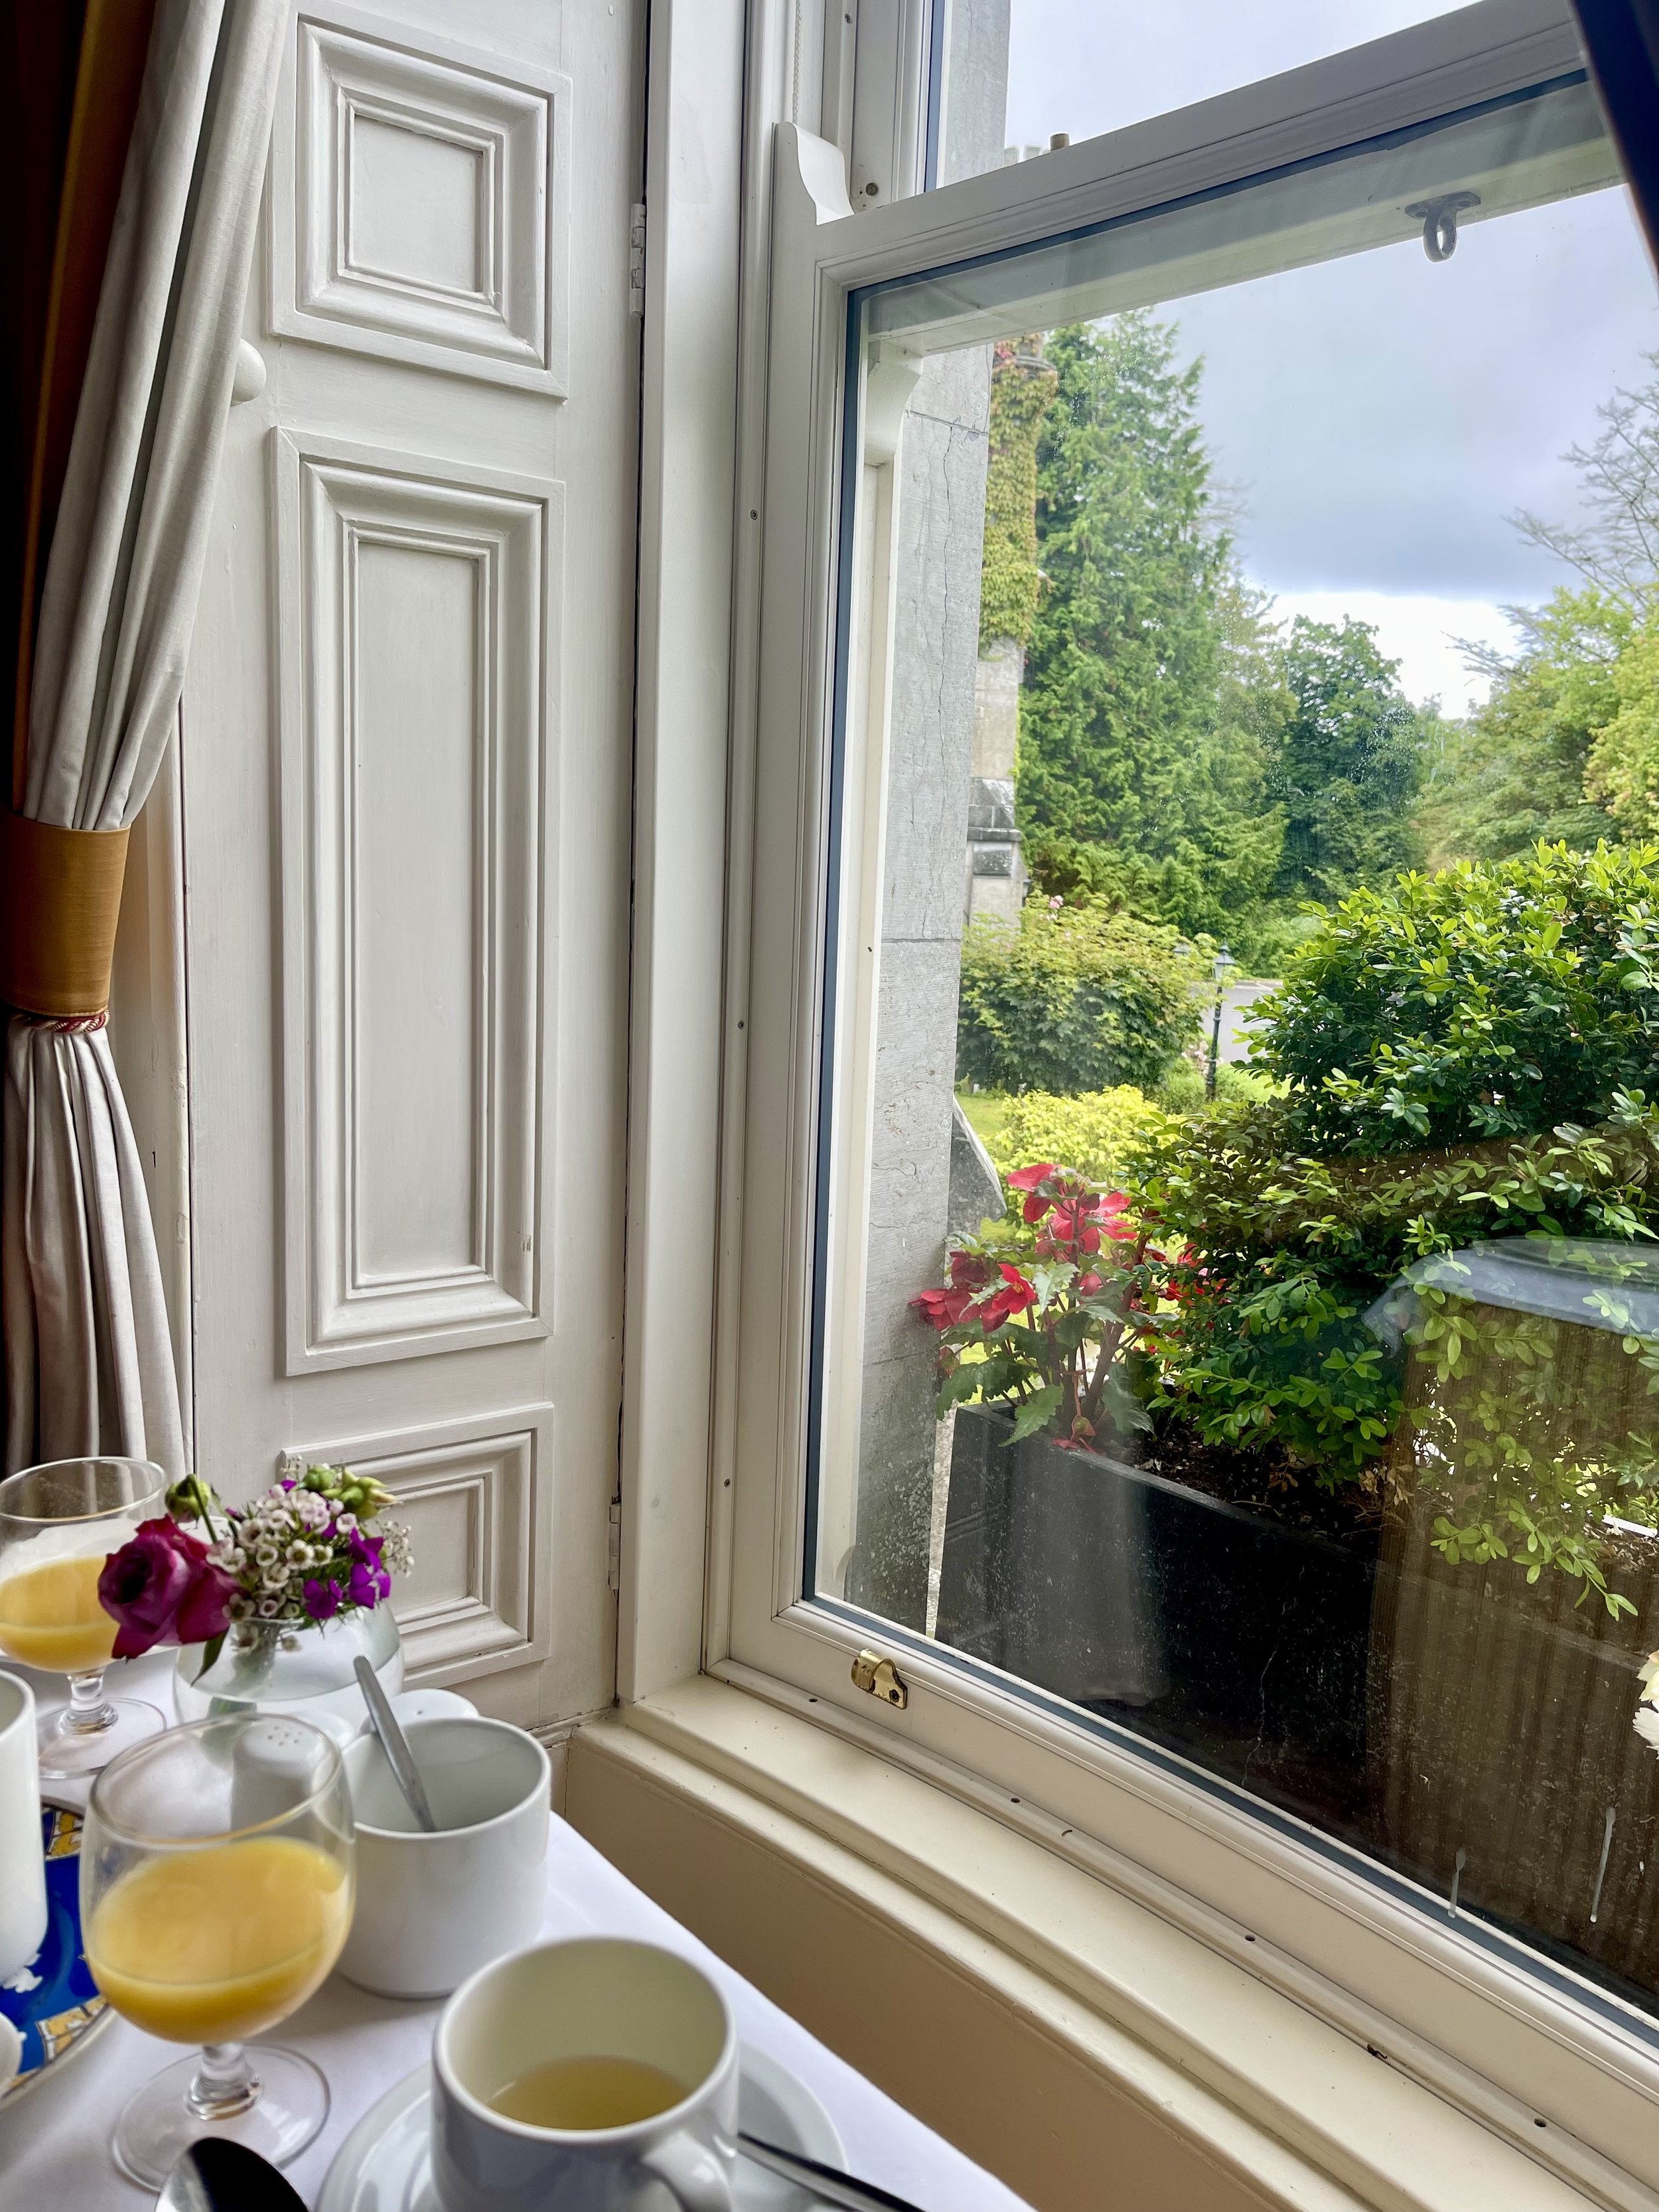 If you are looking for detailed Ballyseede Castle reviews, then you have come to the right place. In this Ballyseede Castle review, I will share all the details of my stay including the delicious Ballyseede Castle breakfast, scrumptious dinner at O’C